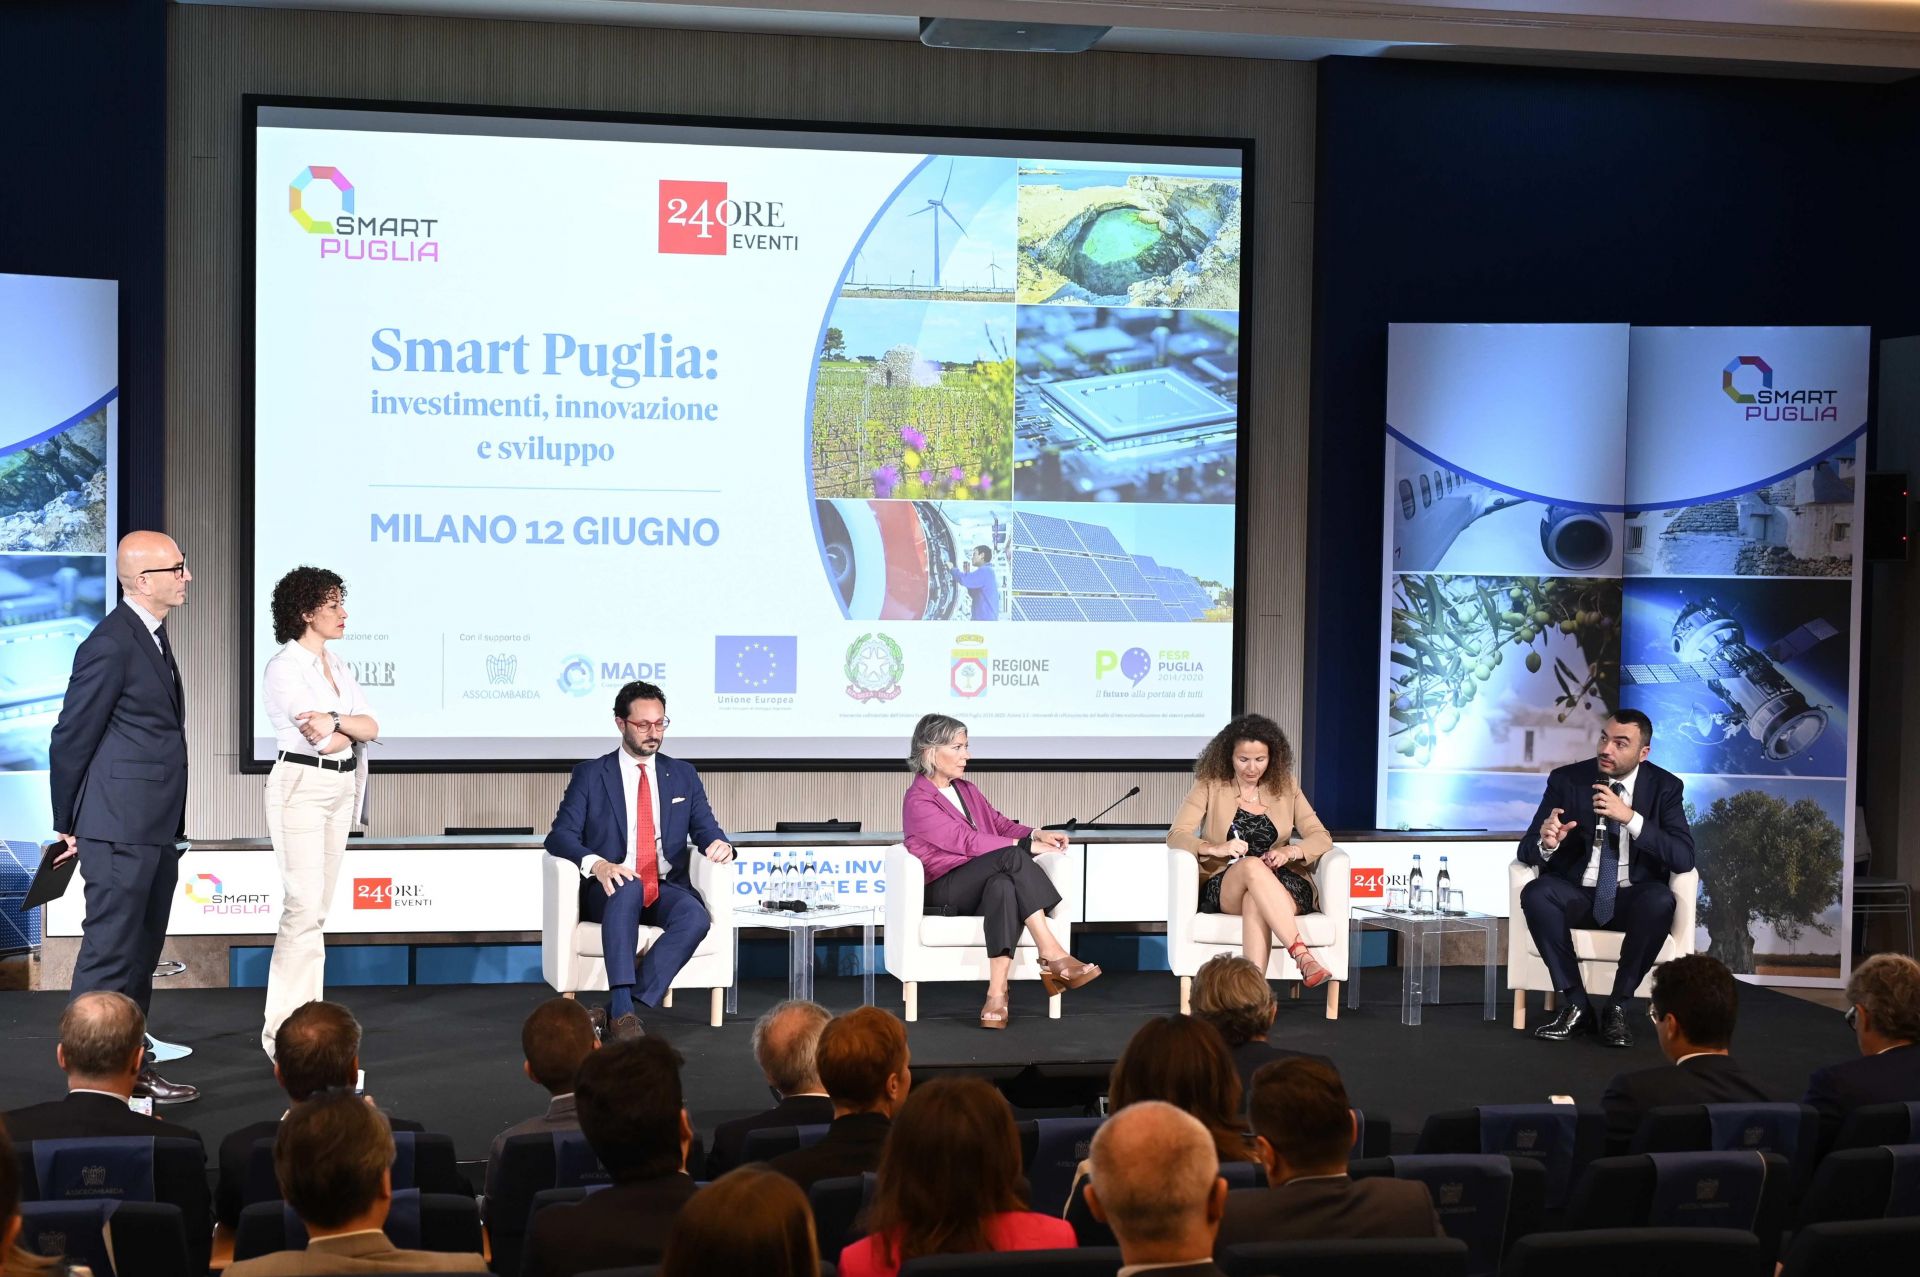 "Smart Apulia”. The opening of Elite's first regional hub has been announced in Milan.